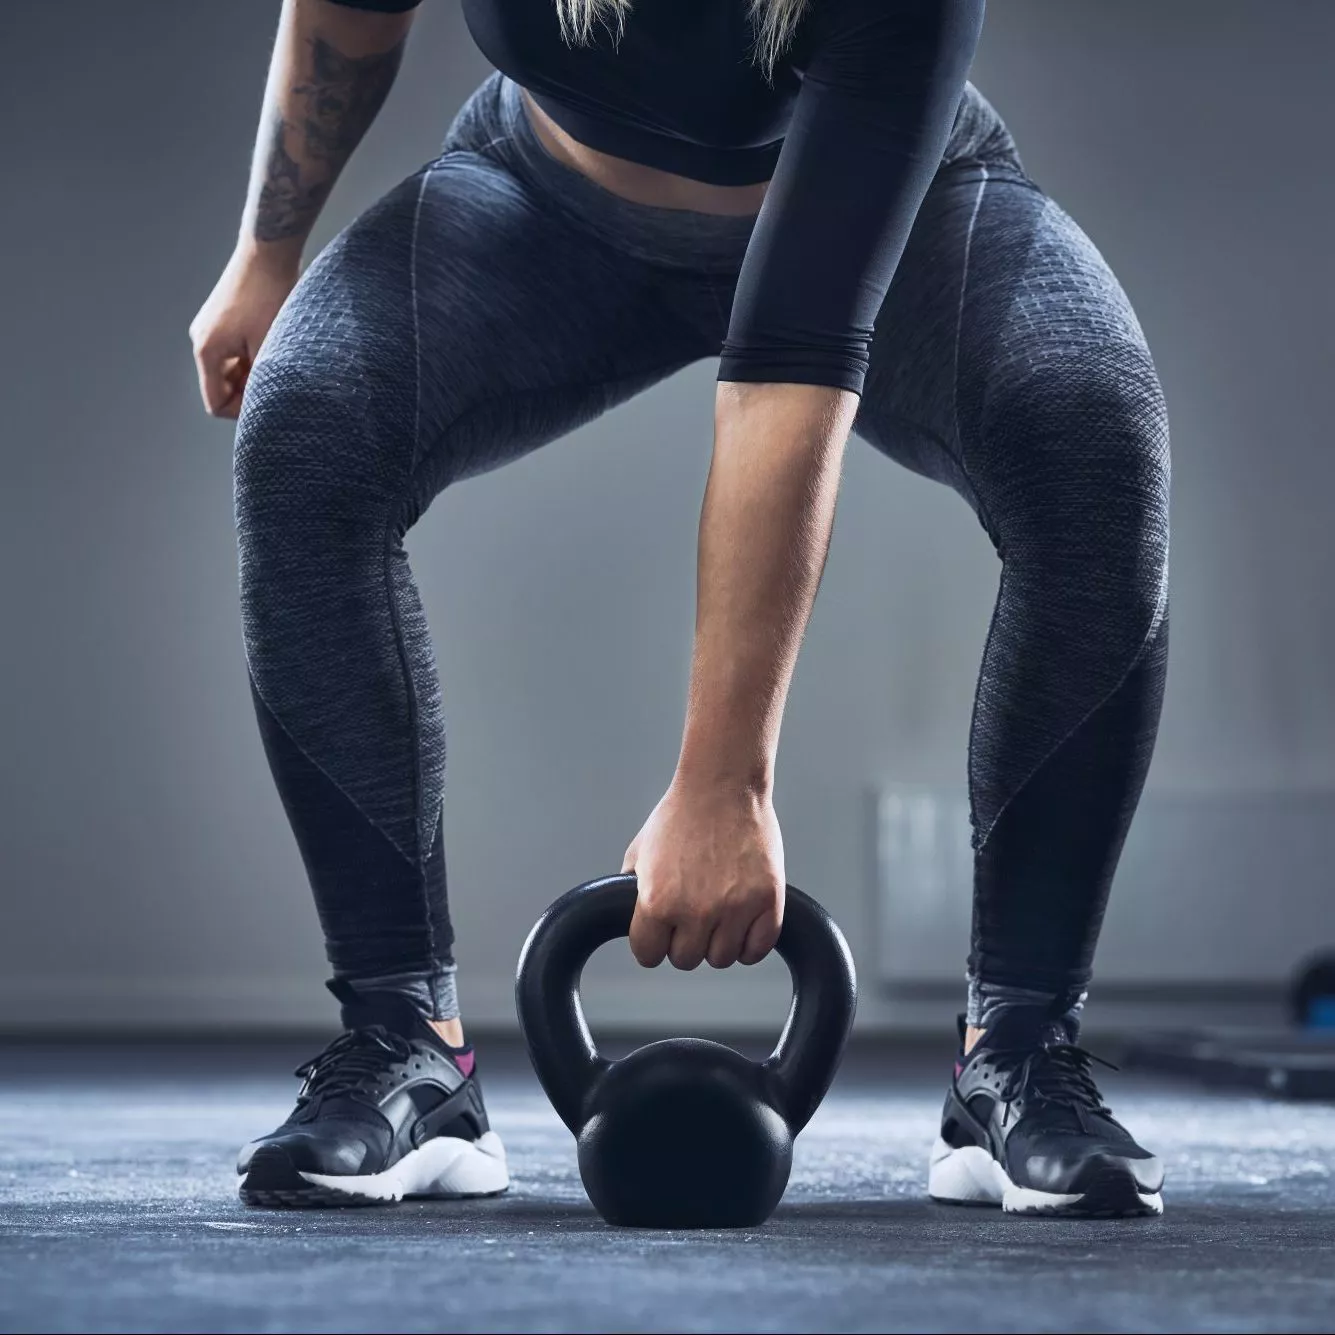 Close-up of athletic woman exercising with kettlebell at gym